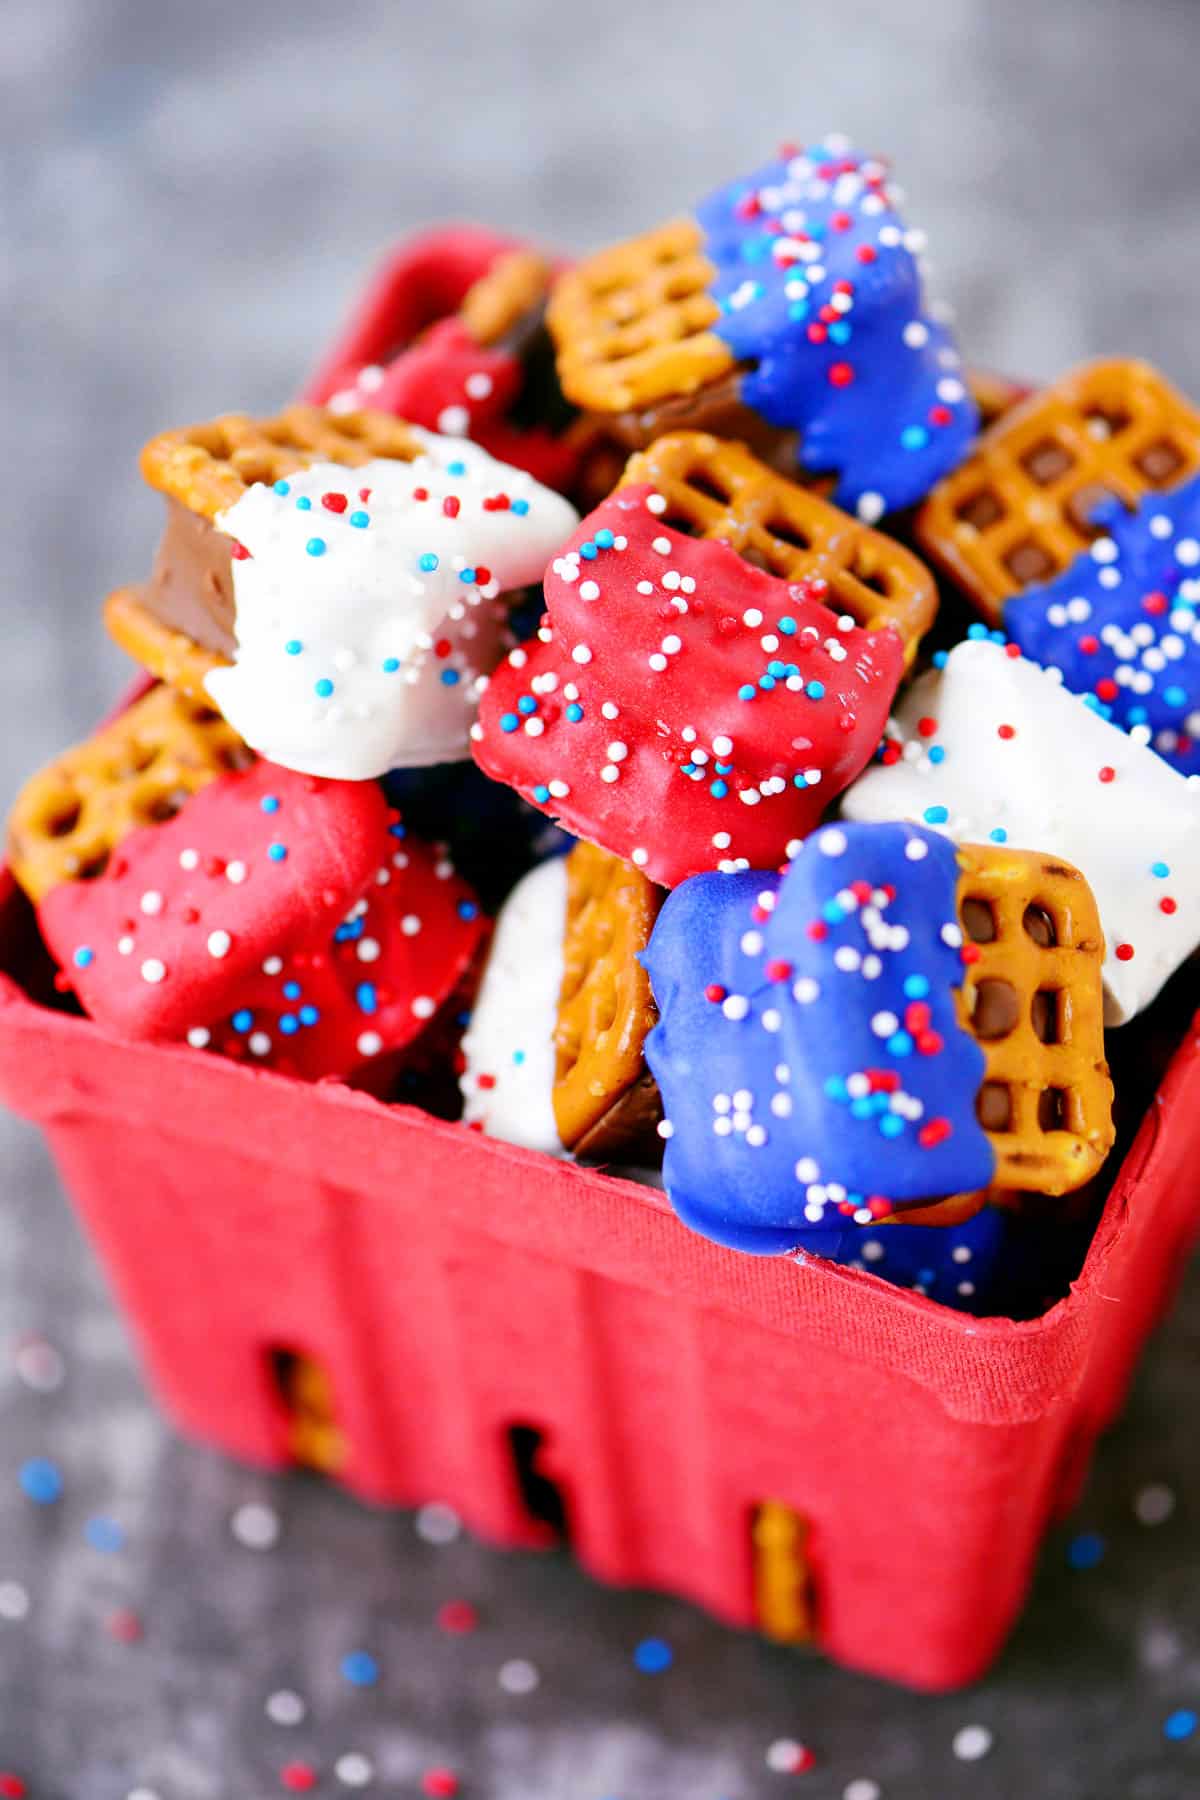 A red basket holding red, white, and blue treats.